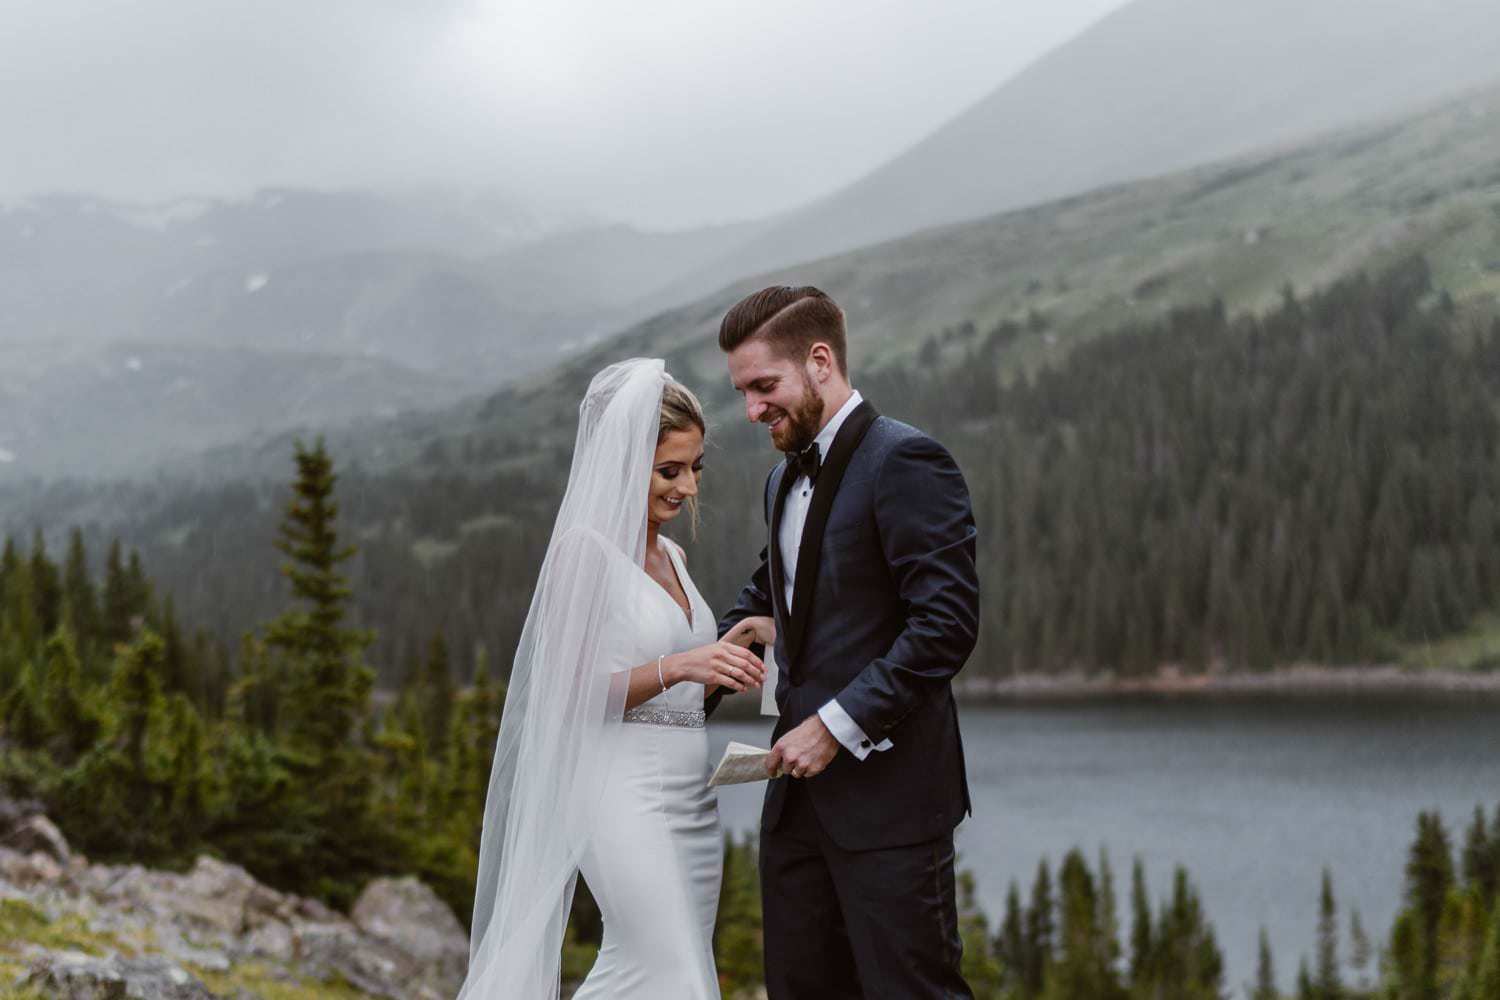 Bride and Groom Vow Ceremony at Georgetown, CO Elopement